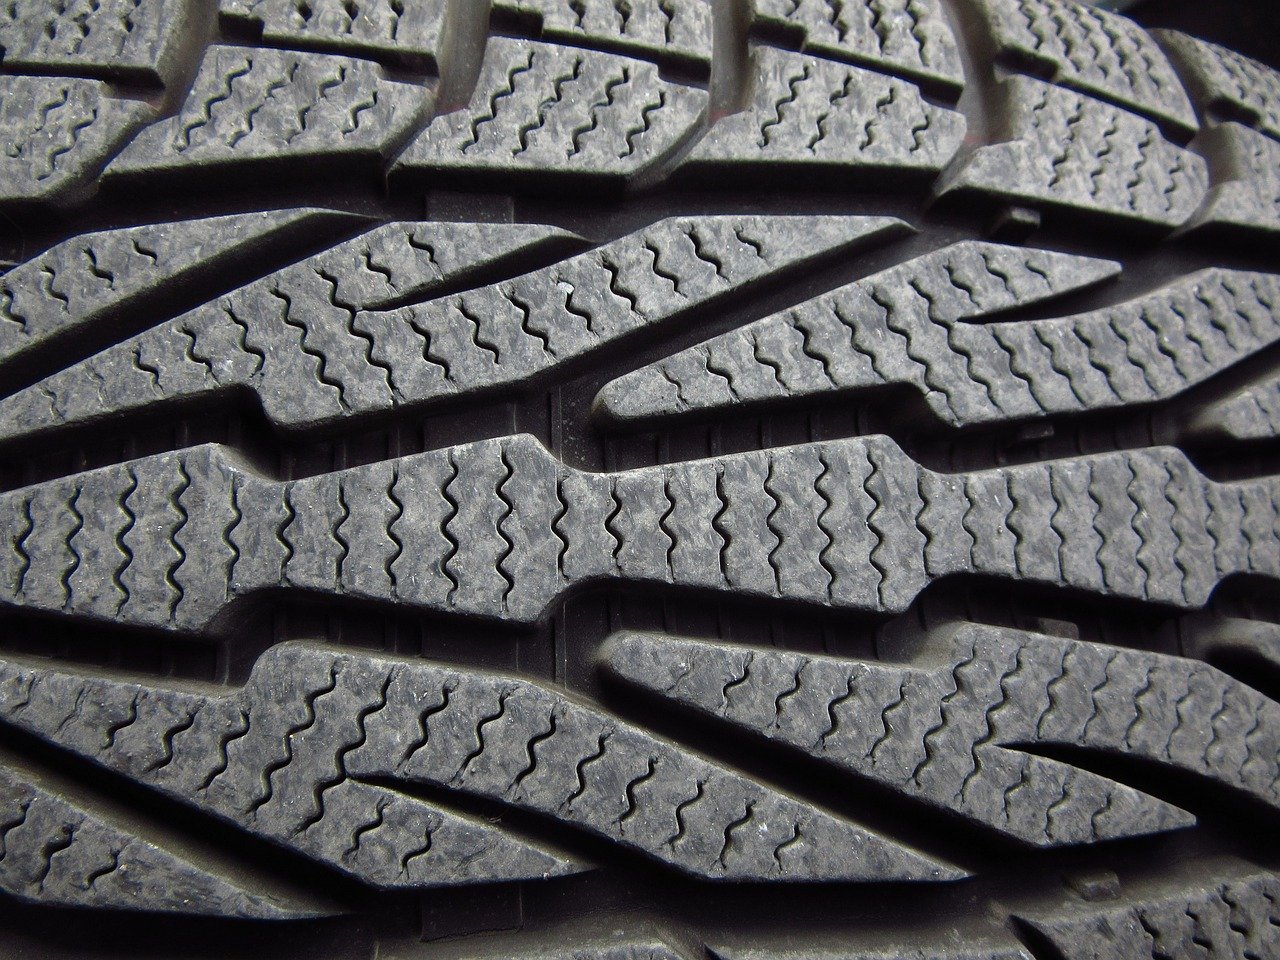 Optimal Performance: High-Quality Tires for All Terrains